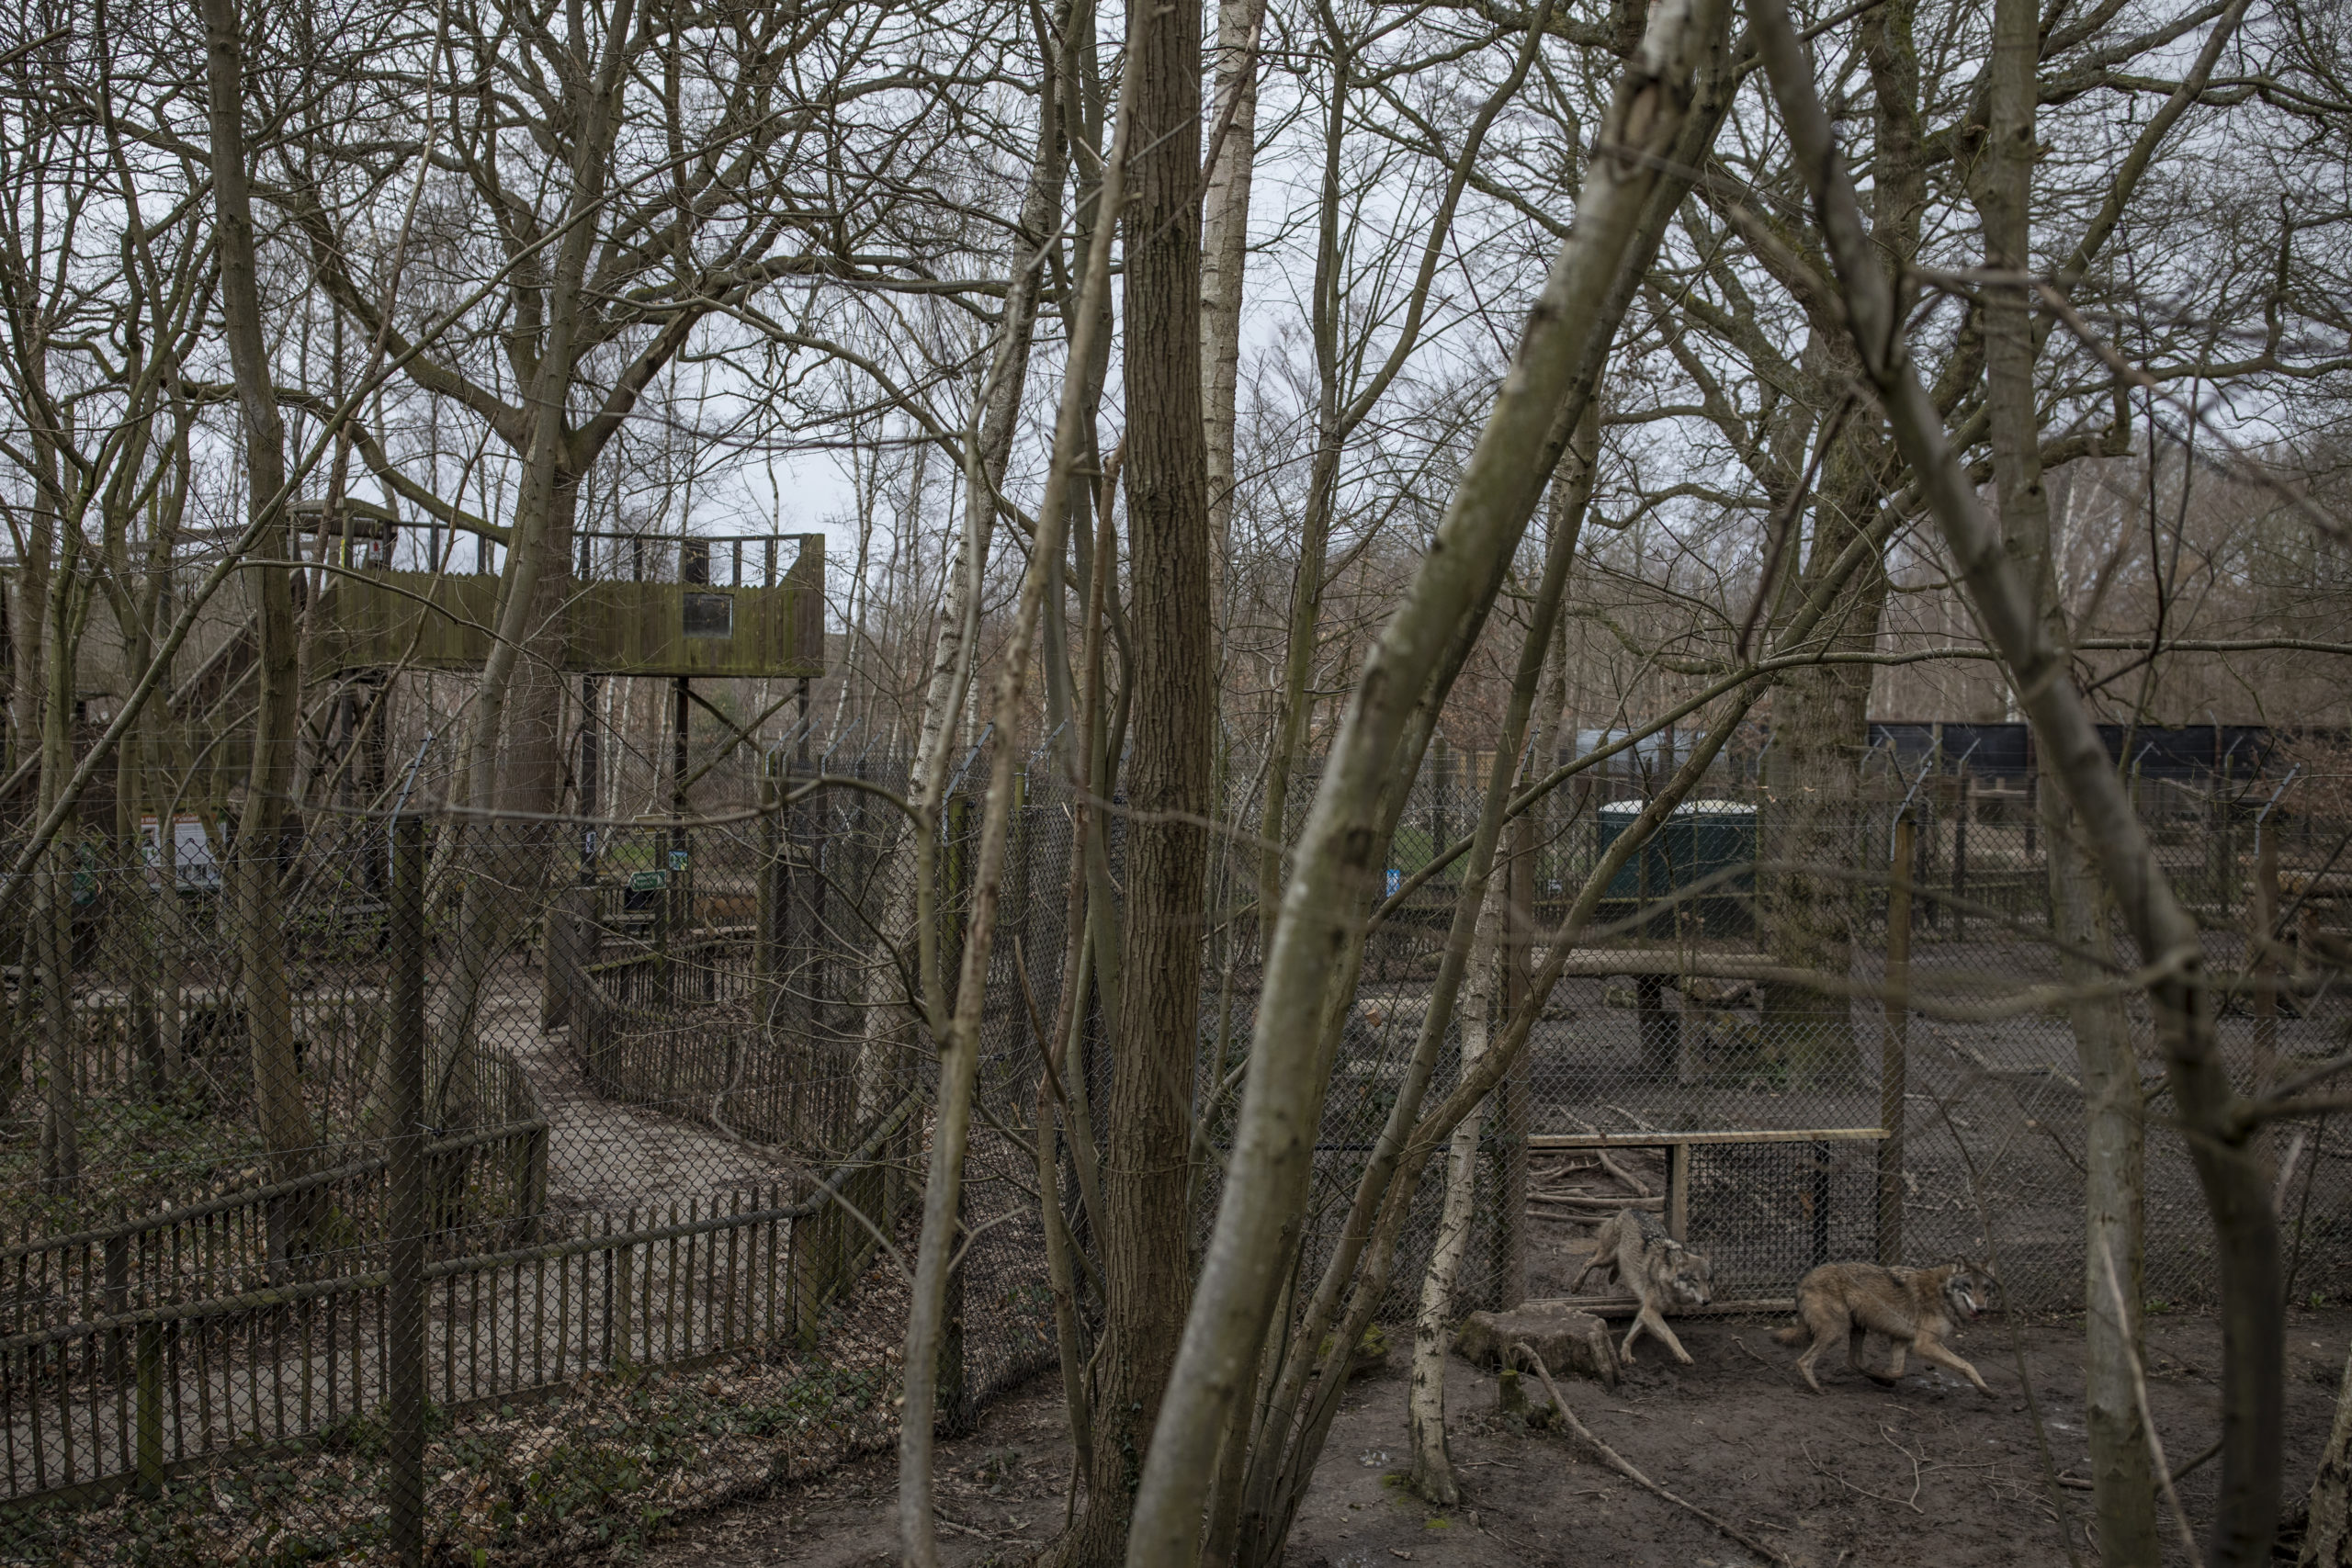 Wolves in their enclosure at Wildwood. (Photo: Dan Kitwood, Getty Images)